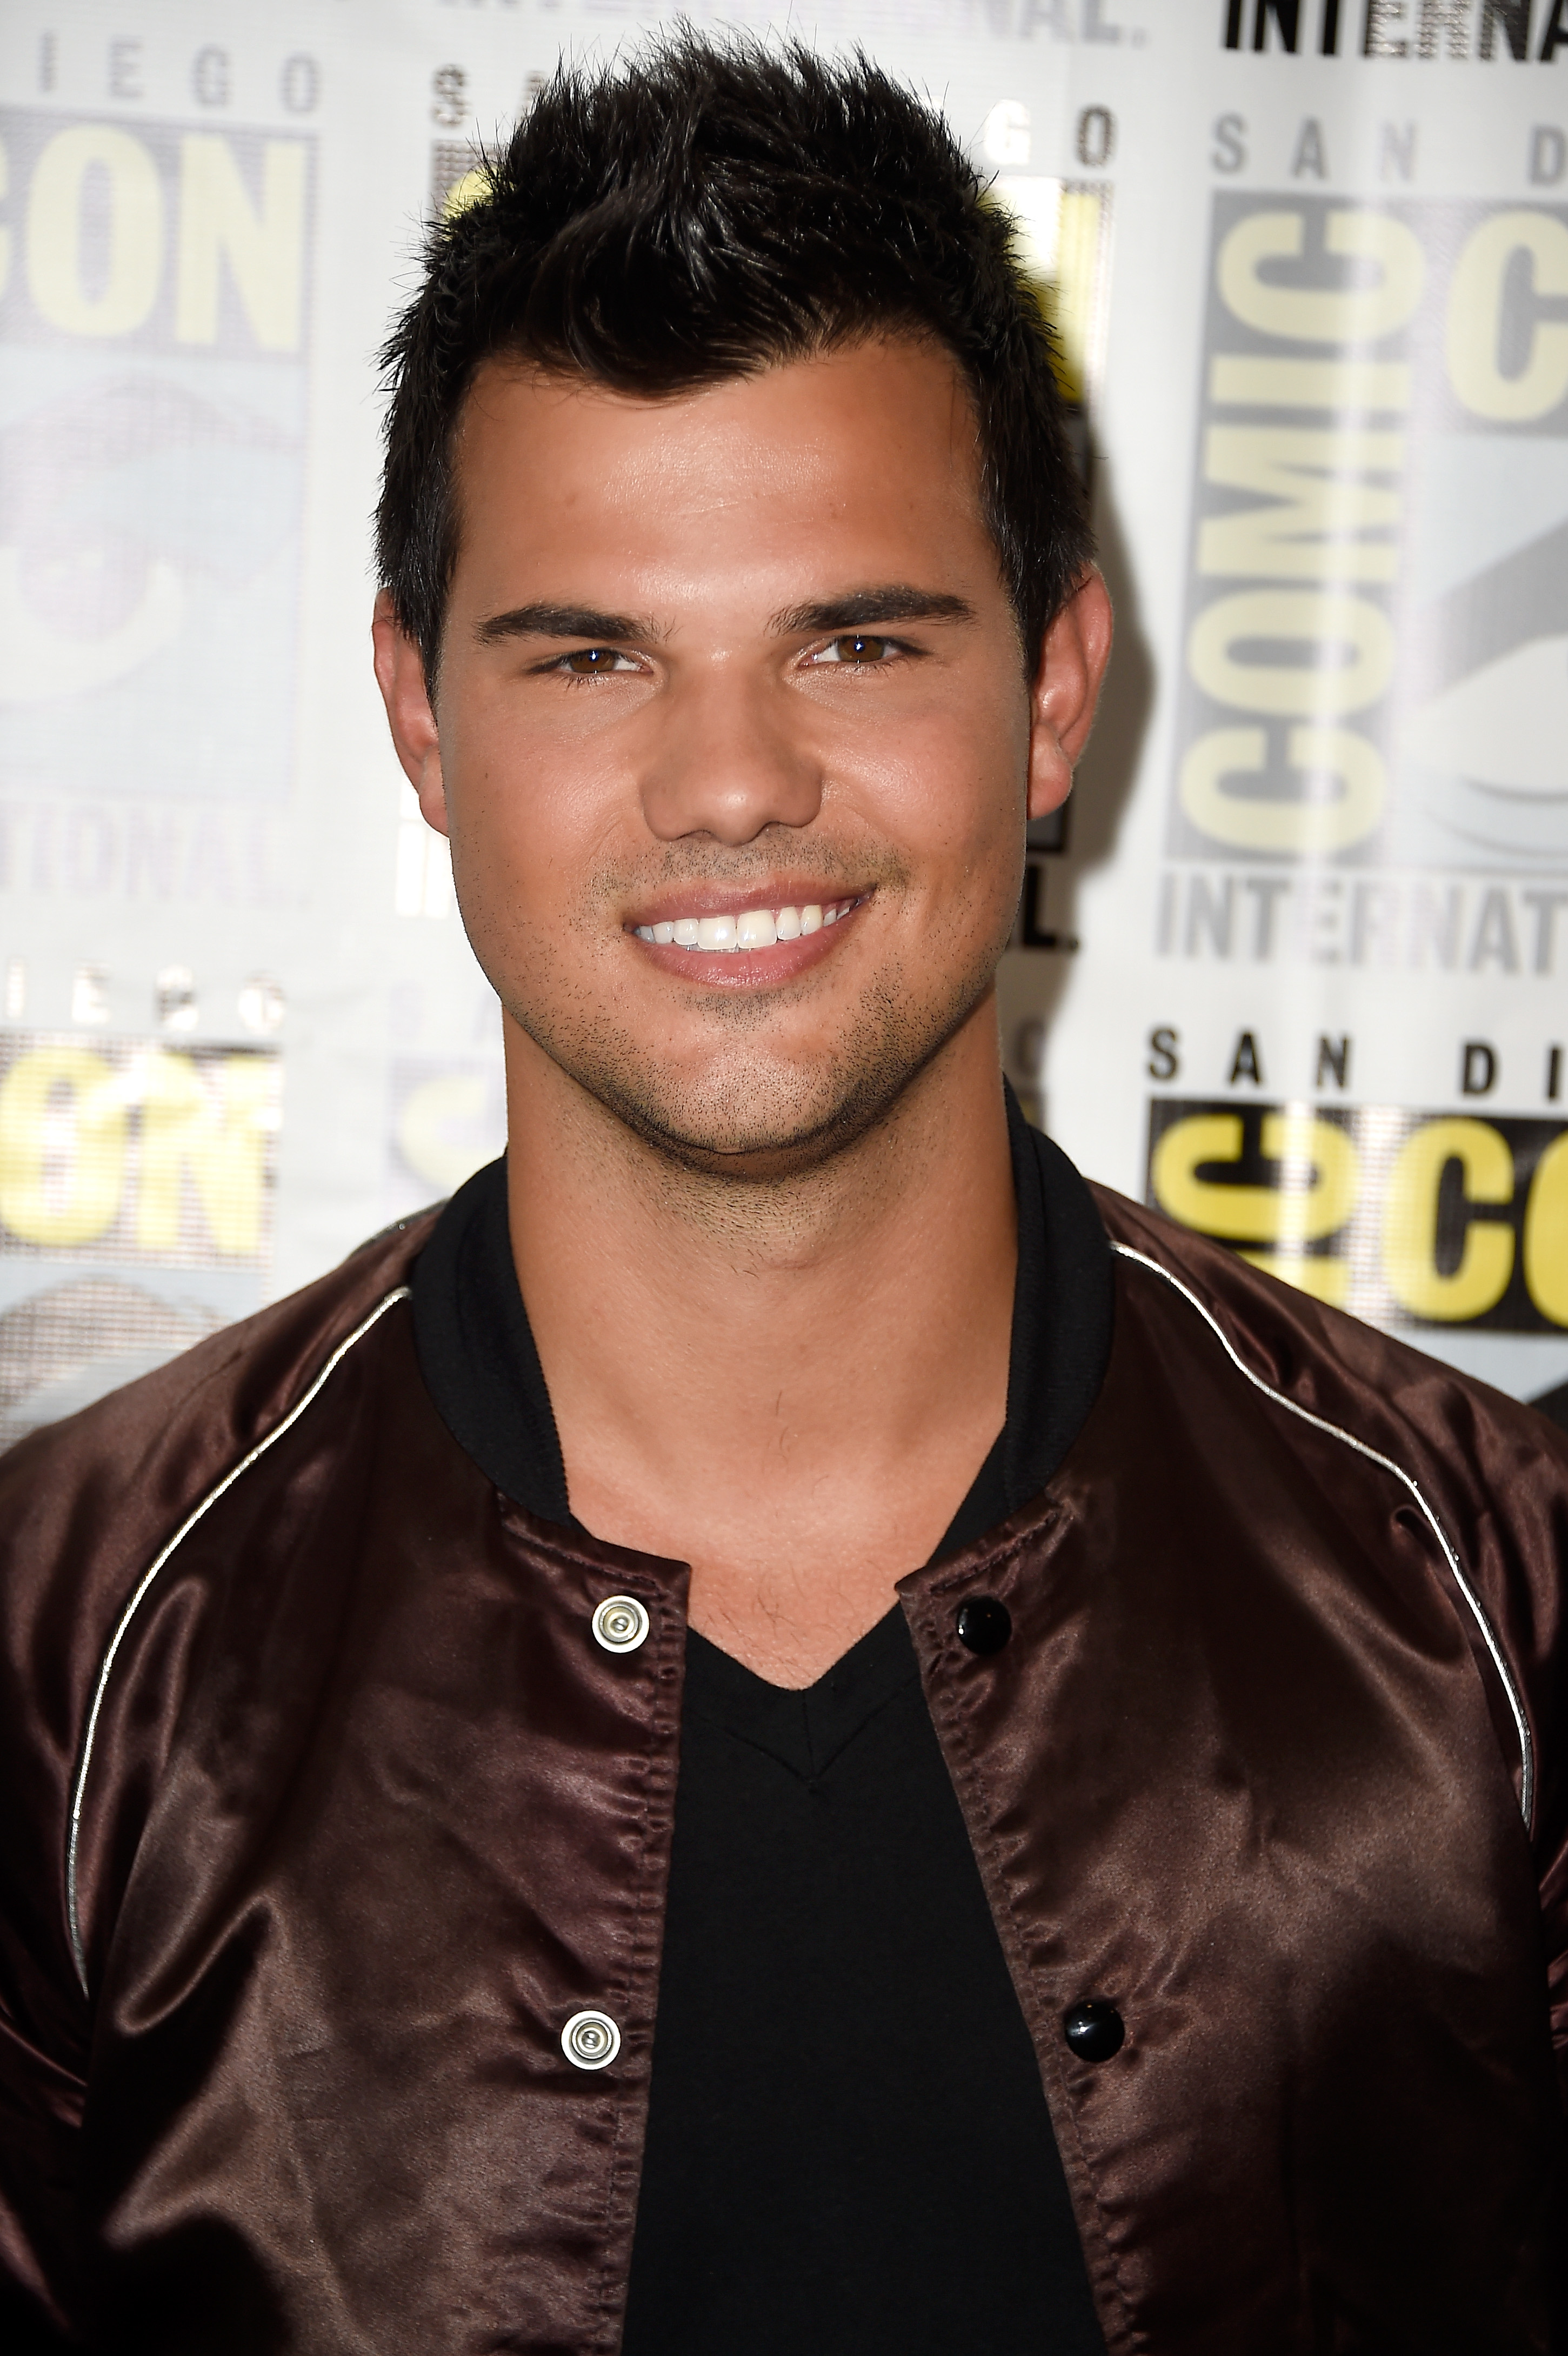 Taylor Lautner in San Diego, California on July 22, 2016 | Source: Getty Images